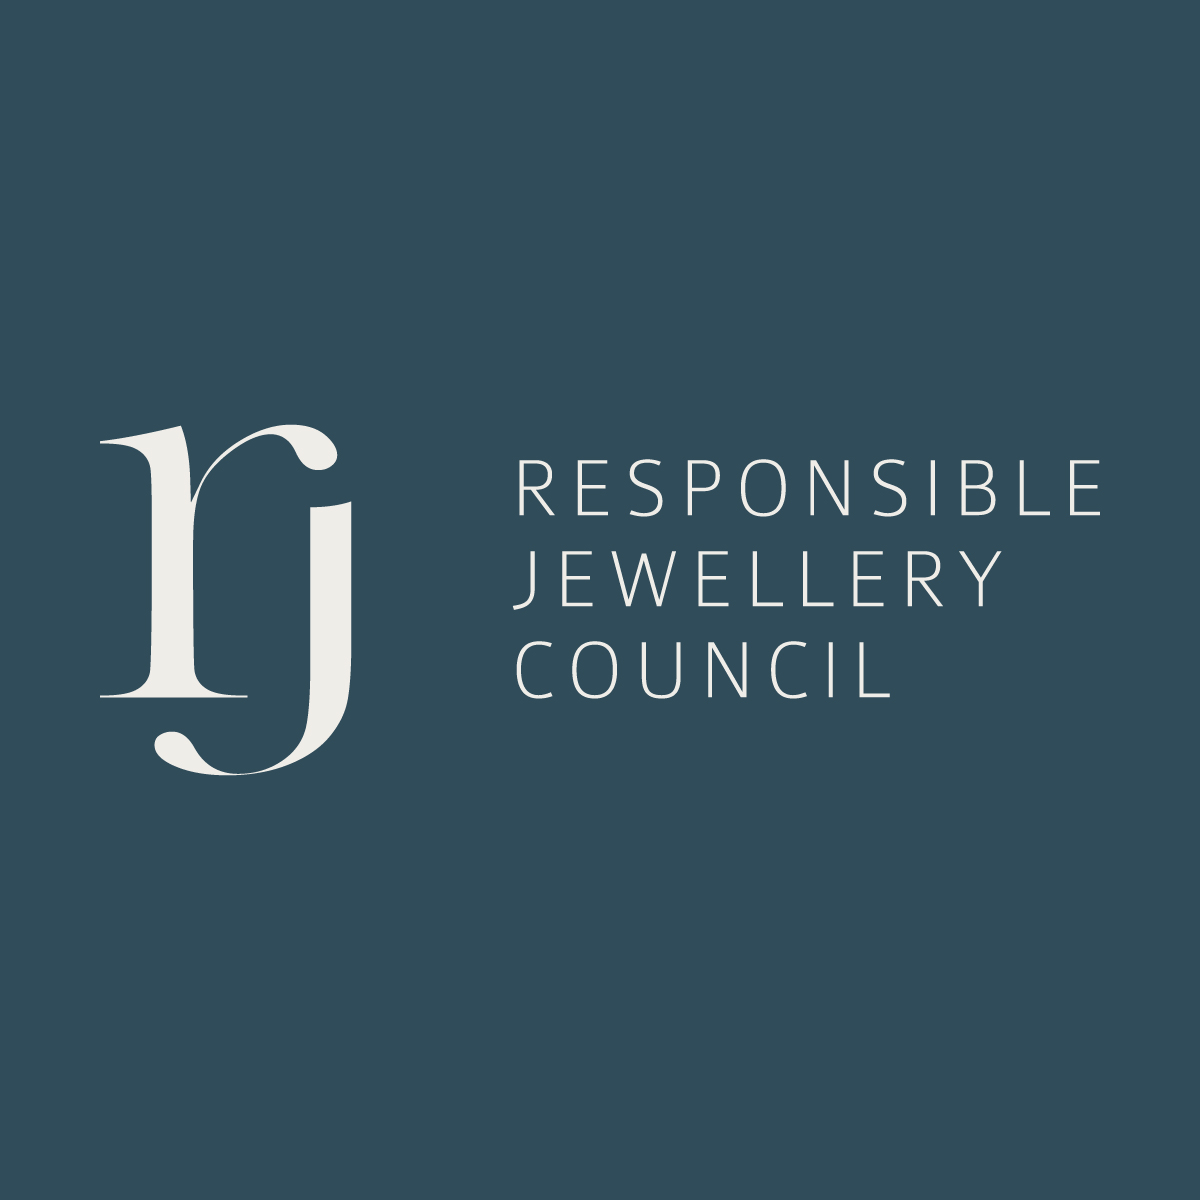 Responsible Jewelry Council Logo